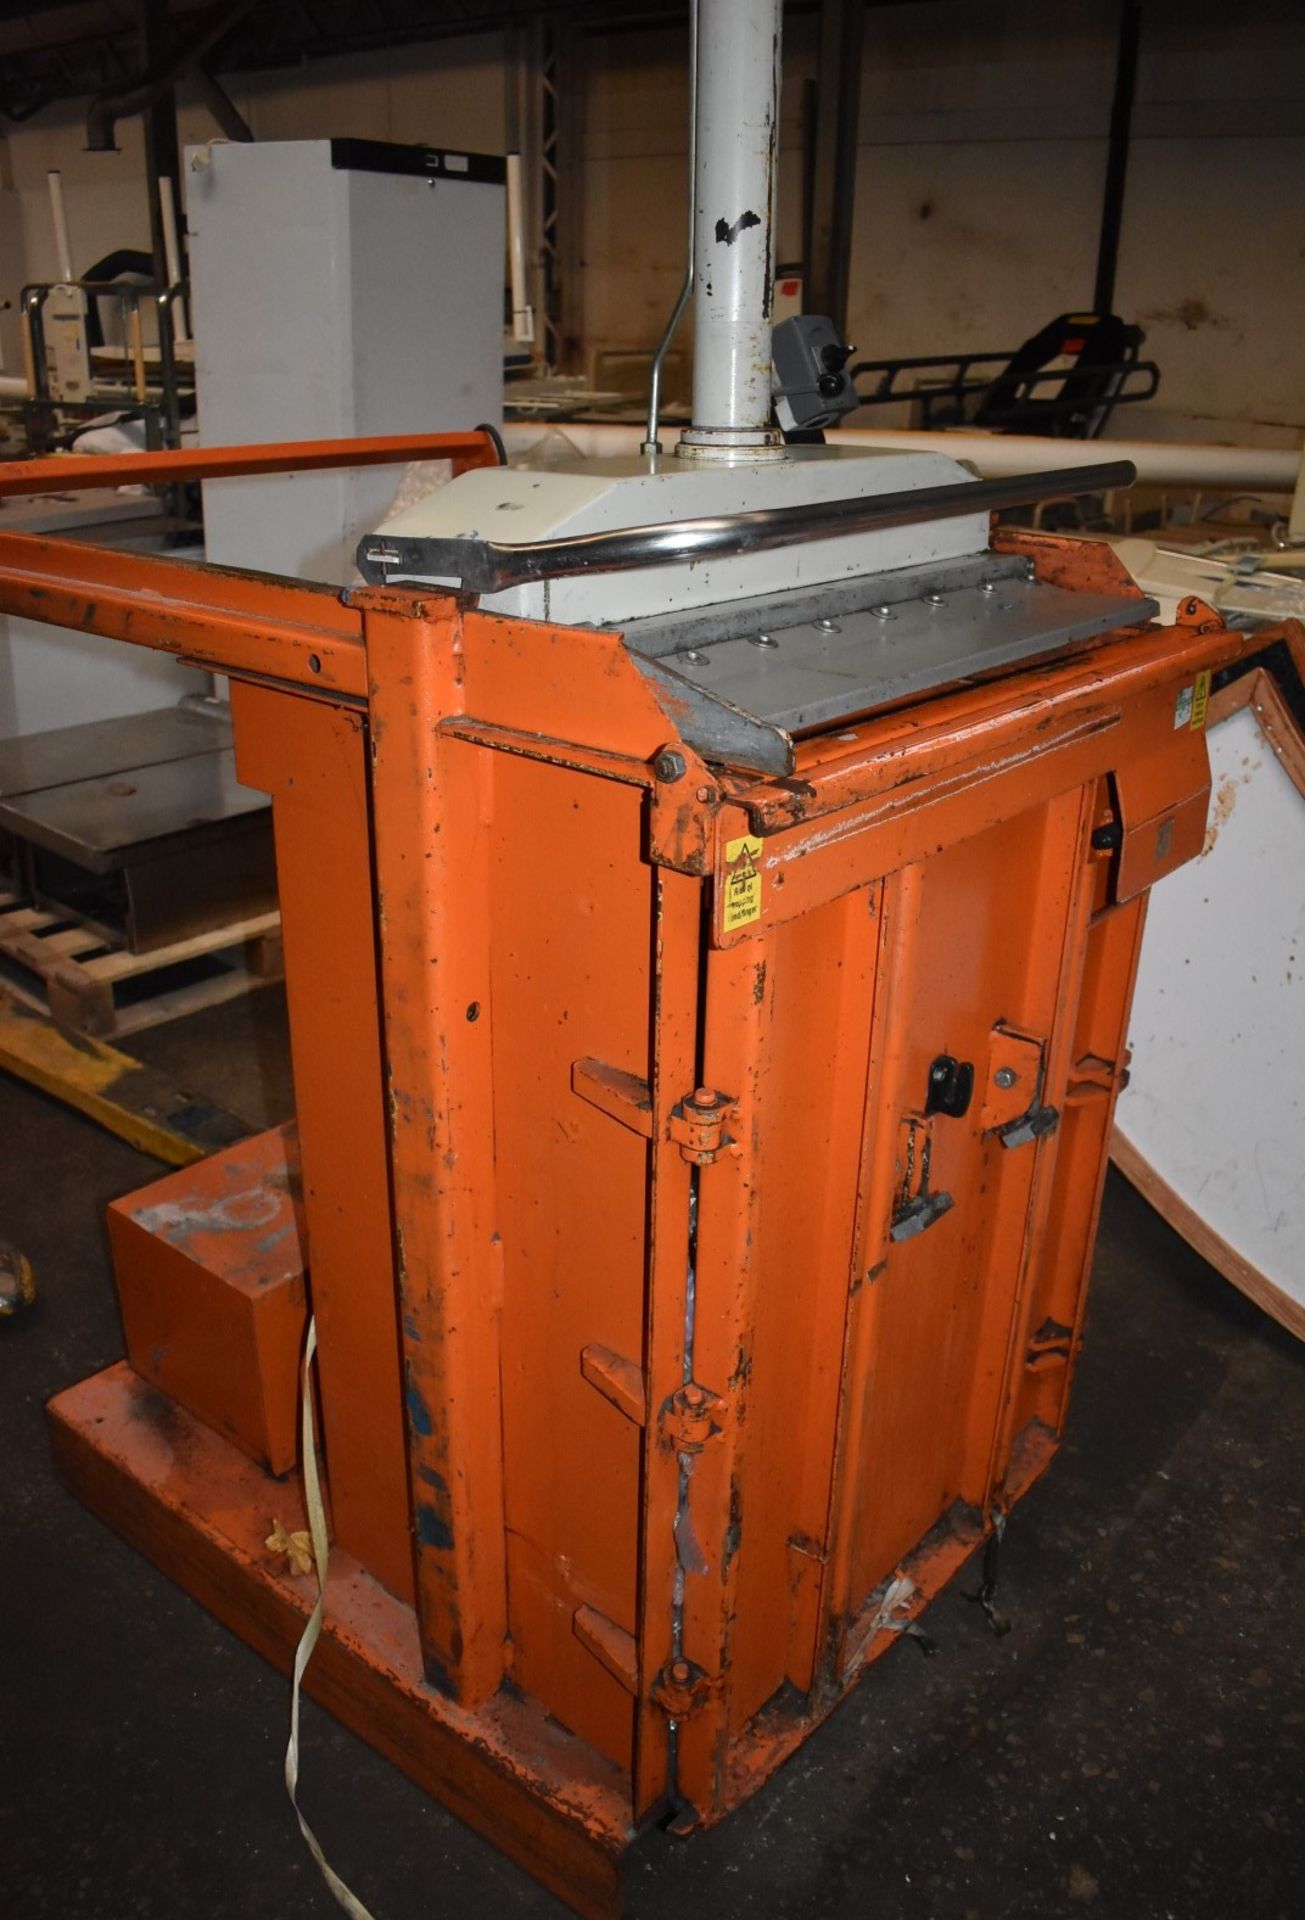 1 x Orwak 5010 Hydraulic Press Compact Cardboard Baler - Used For Compacting Recyclable or Non- - Image 10 of 15